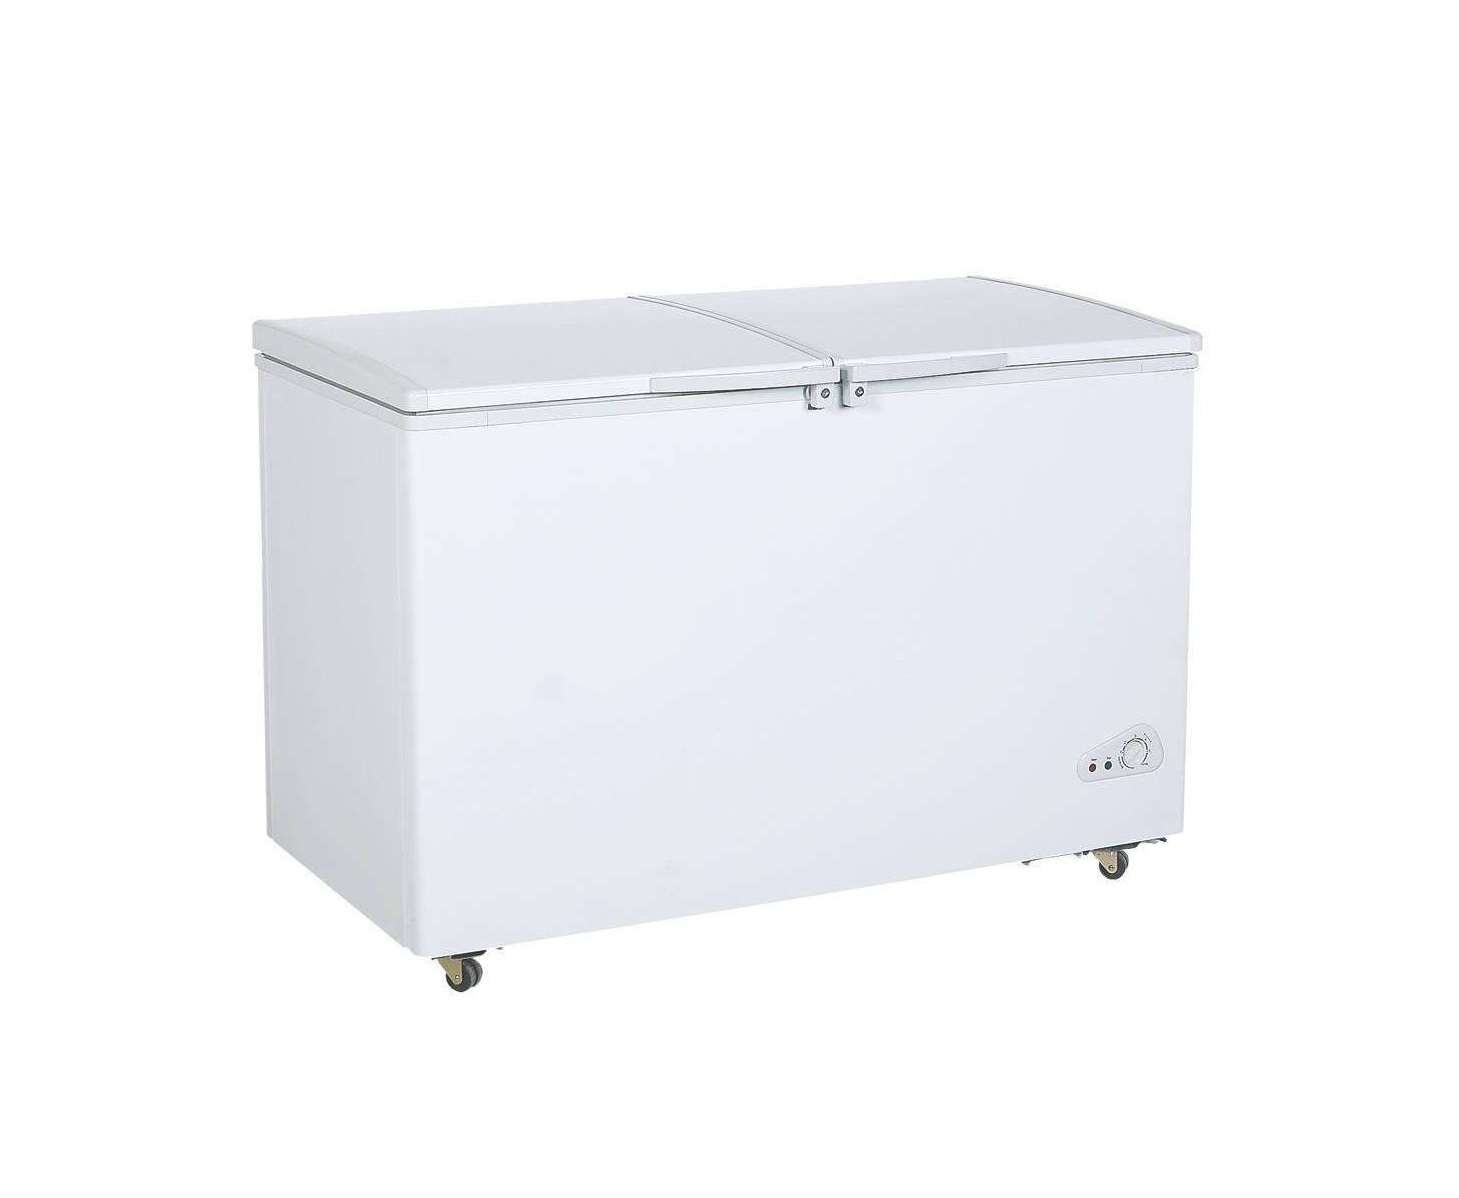 Xperience chest freezer 555 Liter